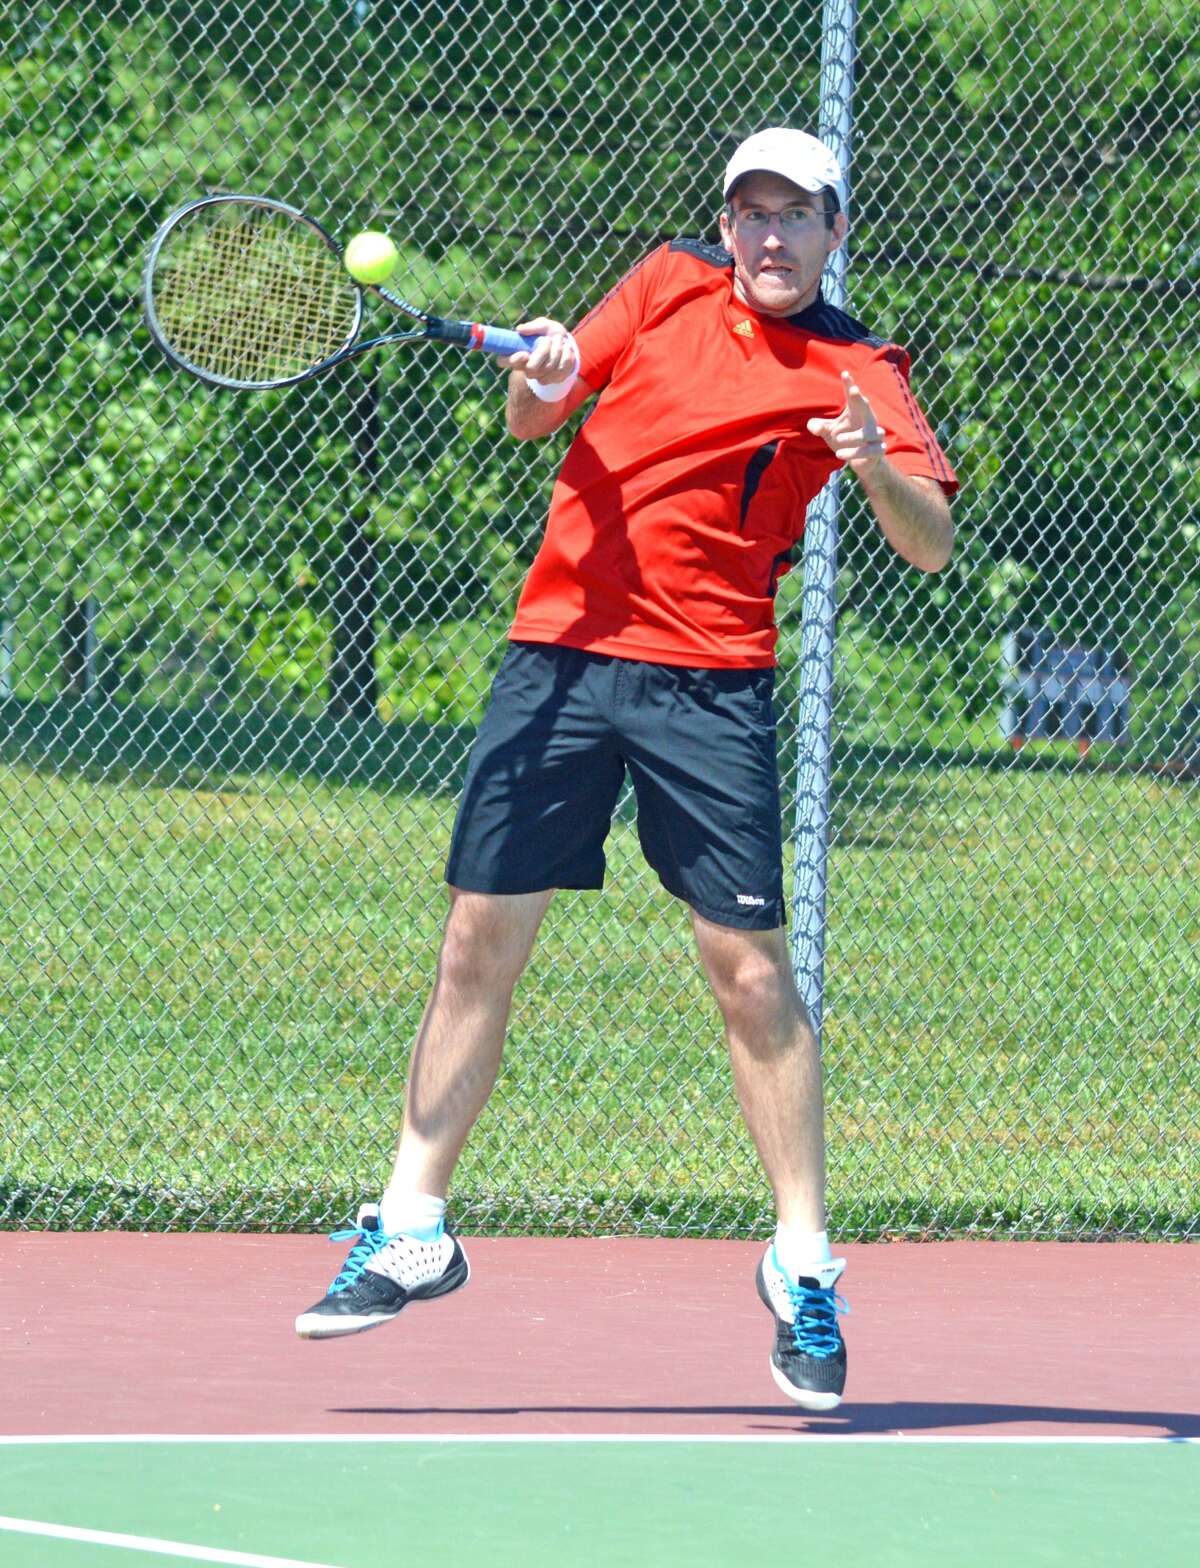 Kirk Schlueter, a 2010 EHS graduate, hits a forehand during his first-round match.